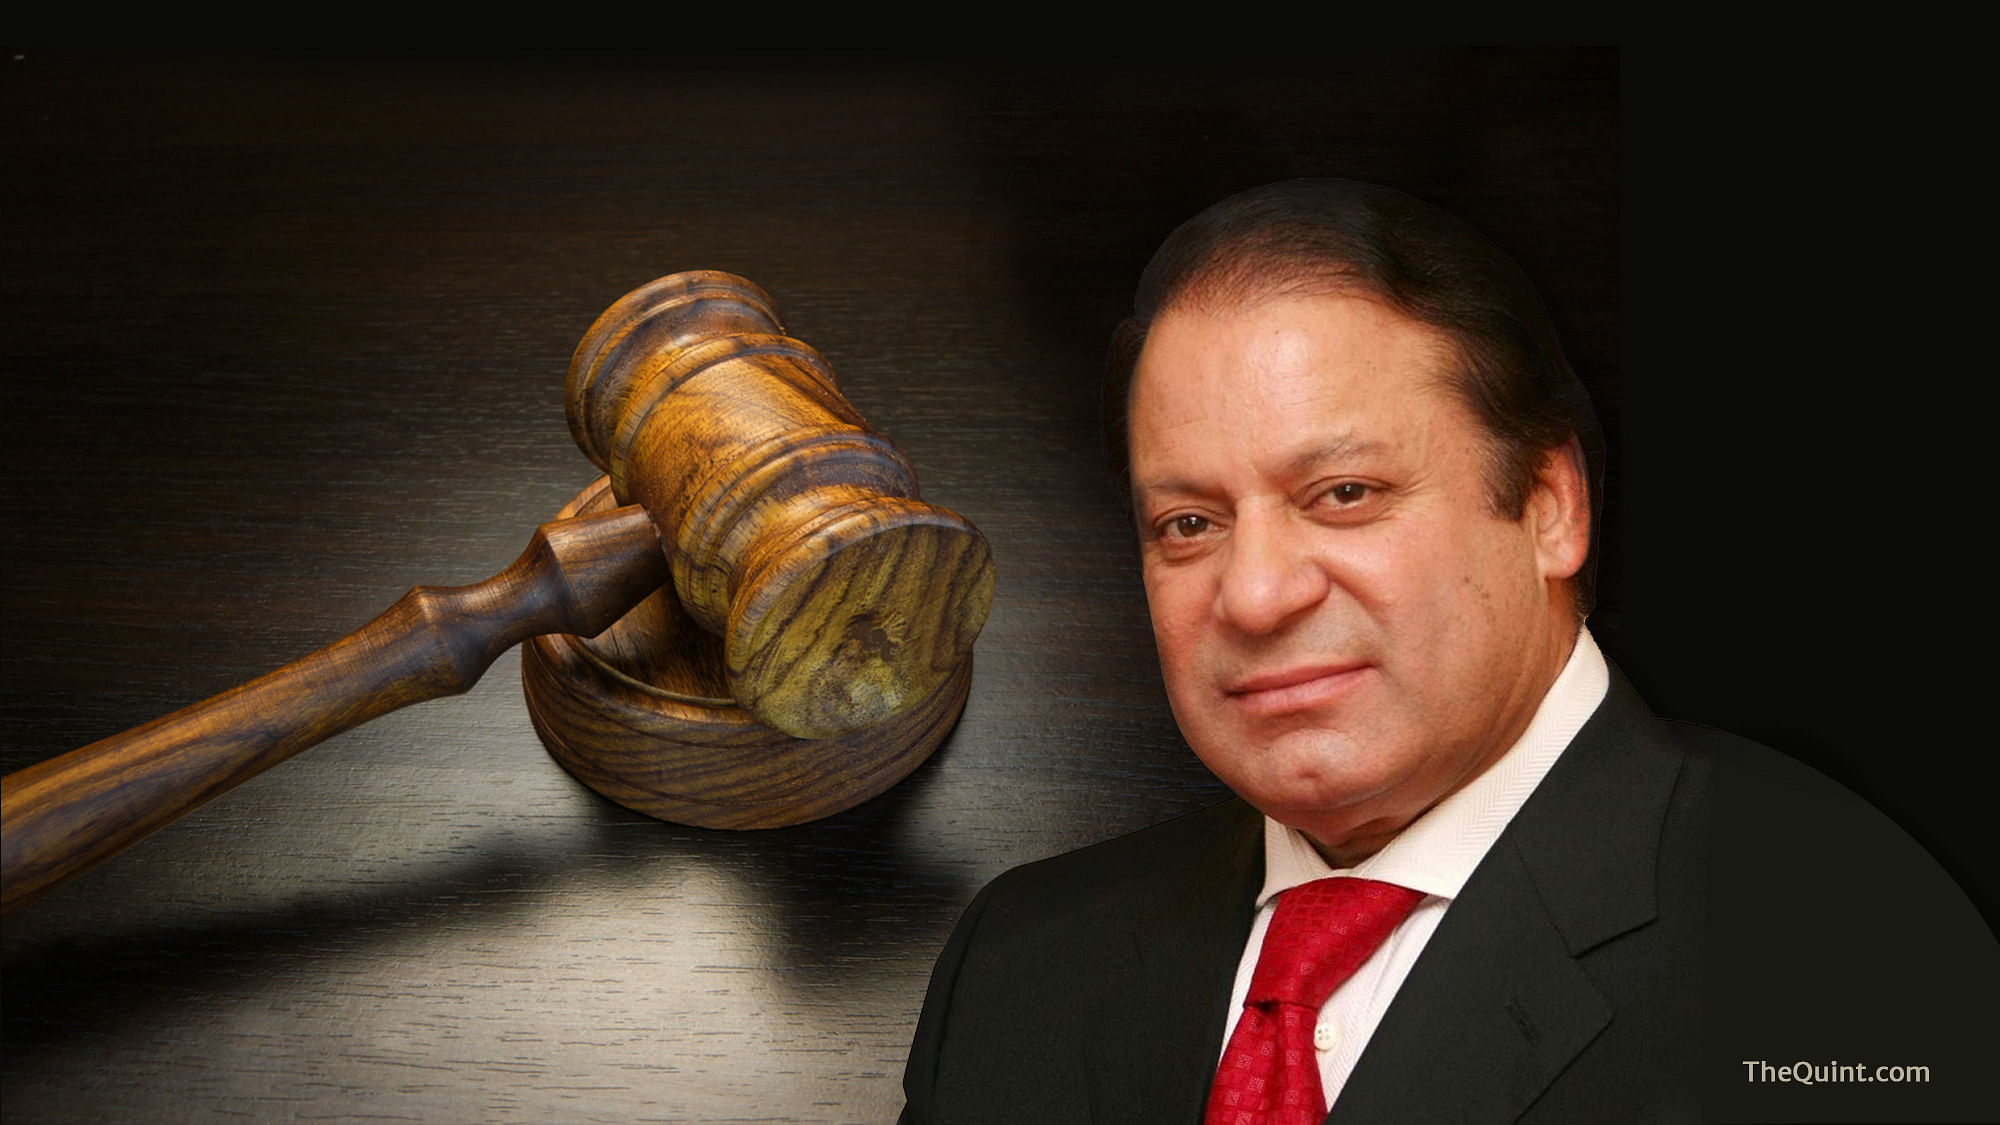 Nawaz Sharif has been ousted as Pakistan’s prime minister following the Panama case verdict on Friday.